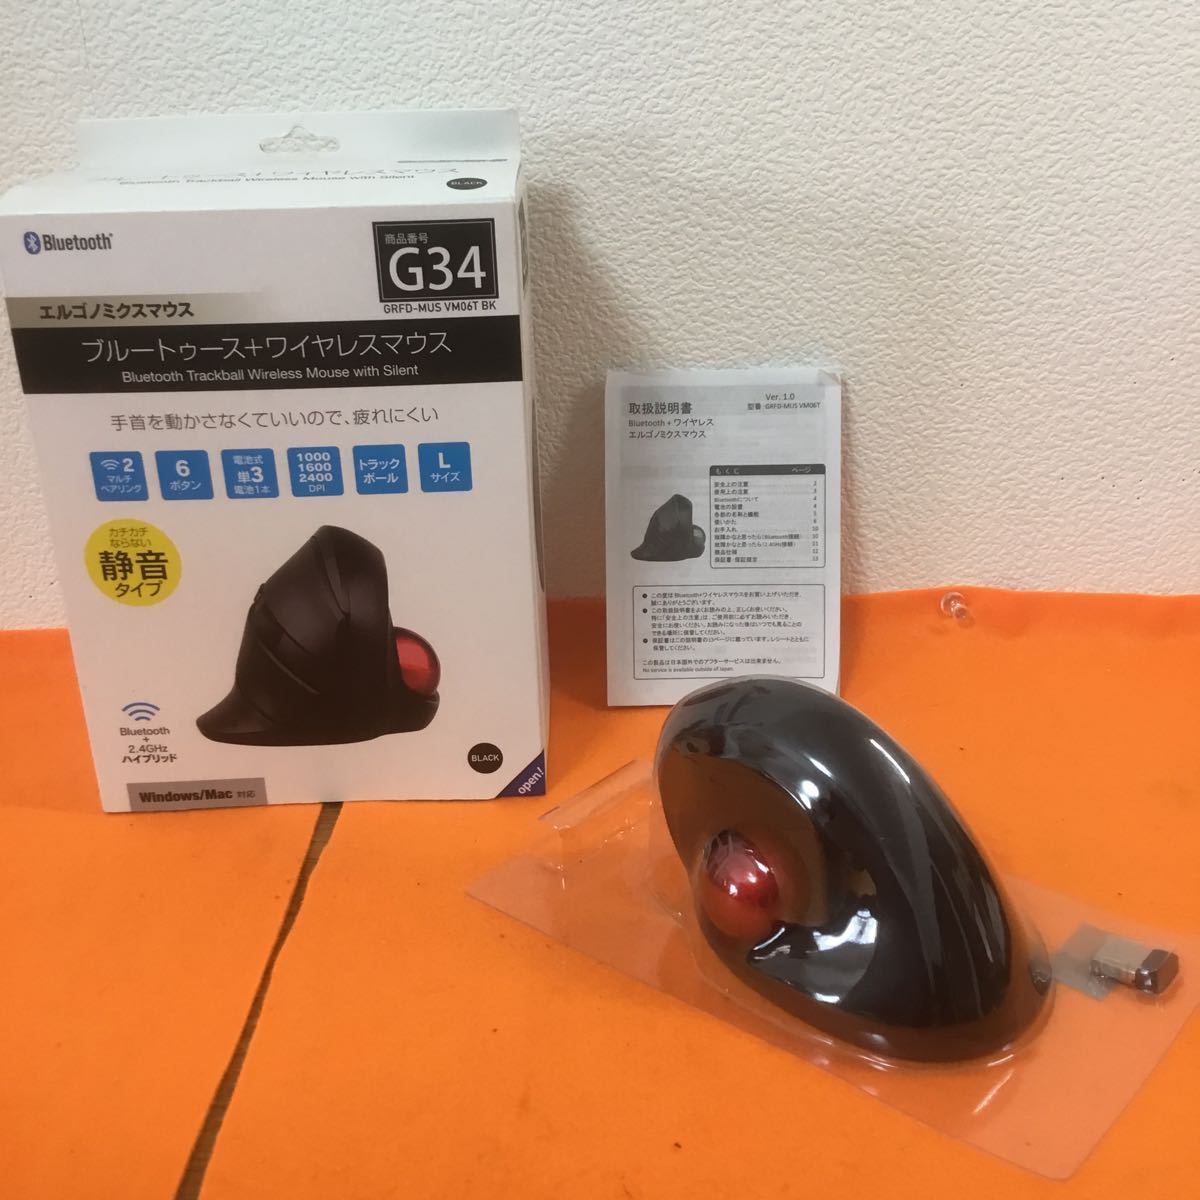 Z-609geo L gono Miku s mouse Bluetooth + wireless mouse trackball mouse 6 button GRFD-MUS VM06T BK * operation verification ending 